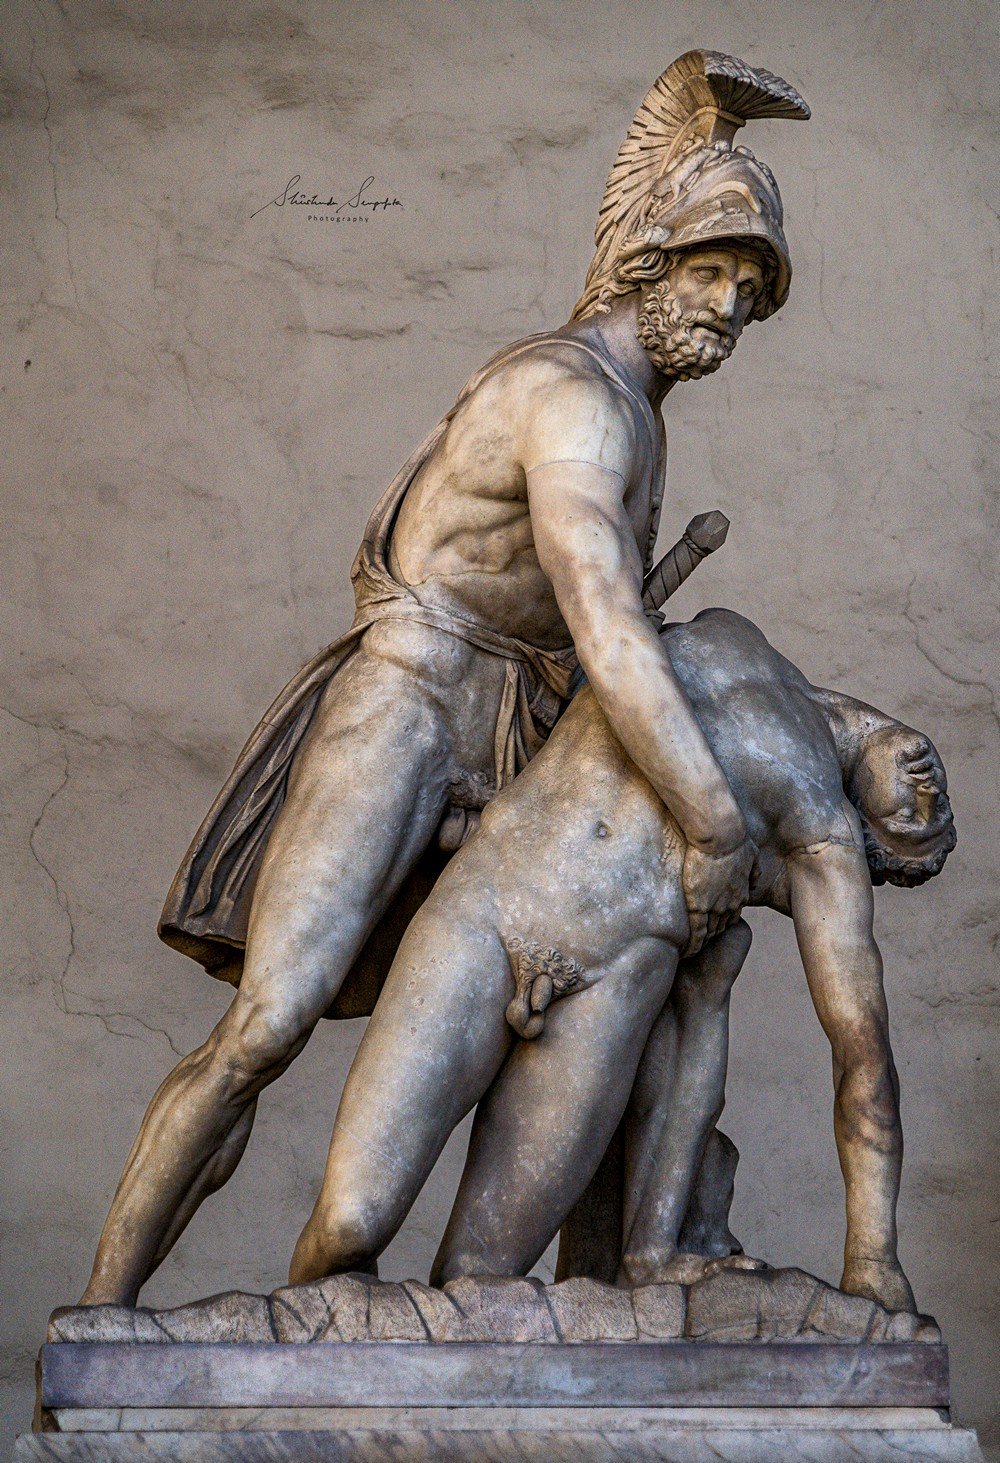 Menelaus supporting the body of Patroclus in loggia del lanzi near palazzo vecchio town hall situated on piazza del signoria in florence tuscany italy shot during summer